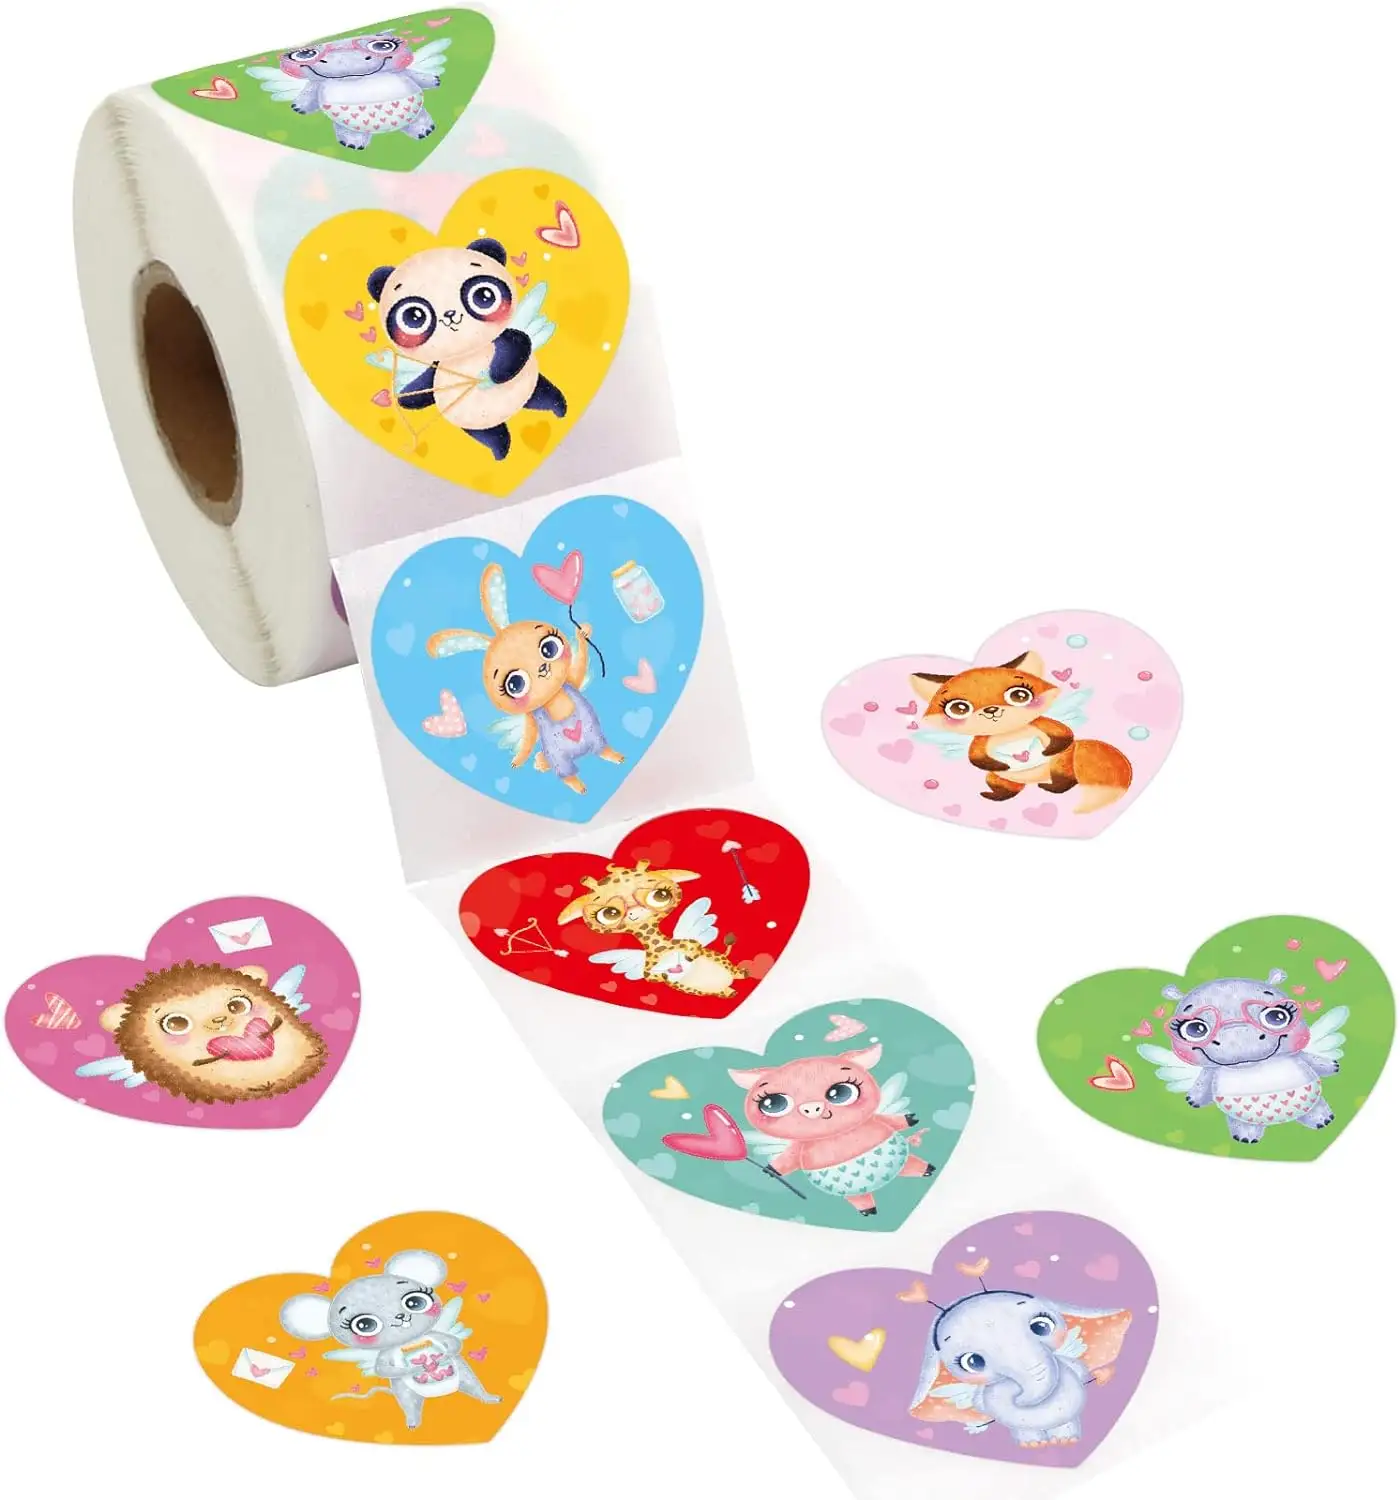 Valentines Stickers for Kids Happy Valentines Day Animal Heart Love Sticker Roll Party Decorations Supplies for Envelopes Cards